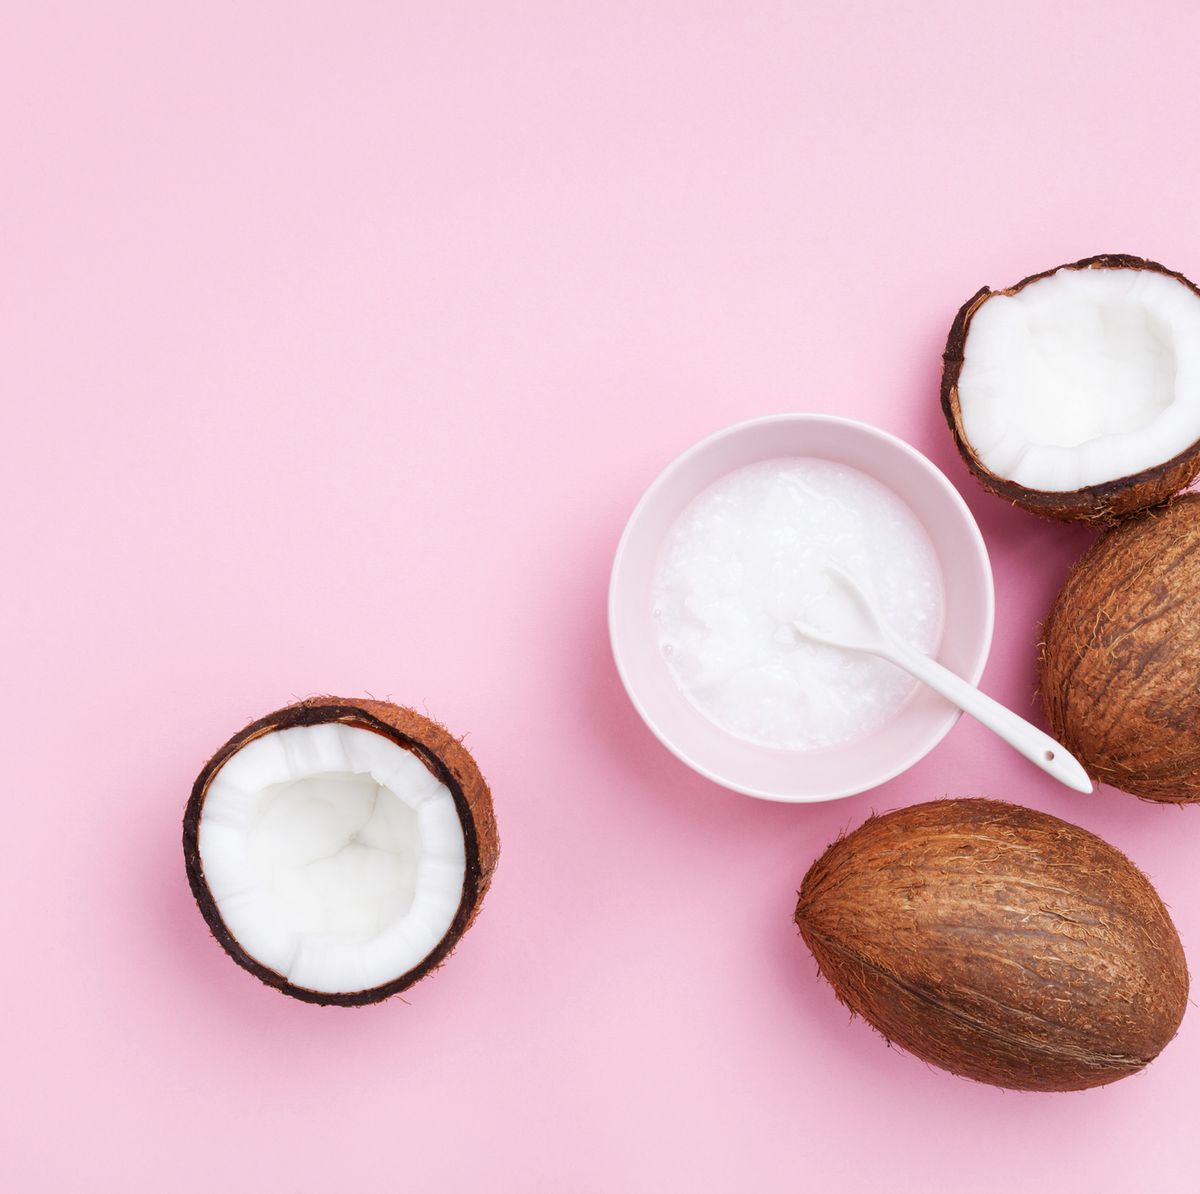 How to Use Coconut Oil for Face: Benefits and Uses